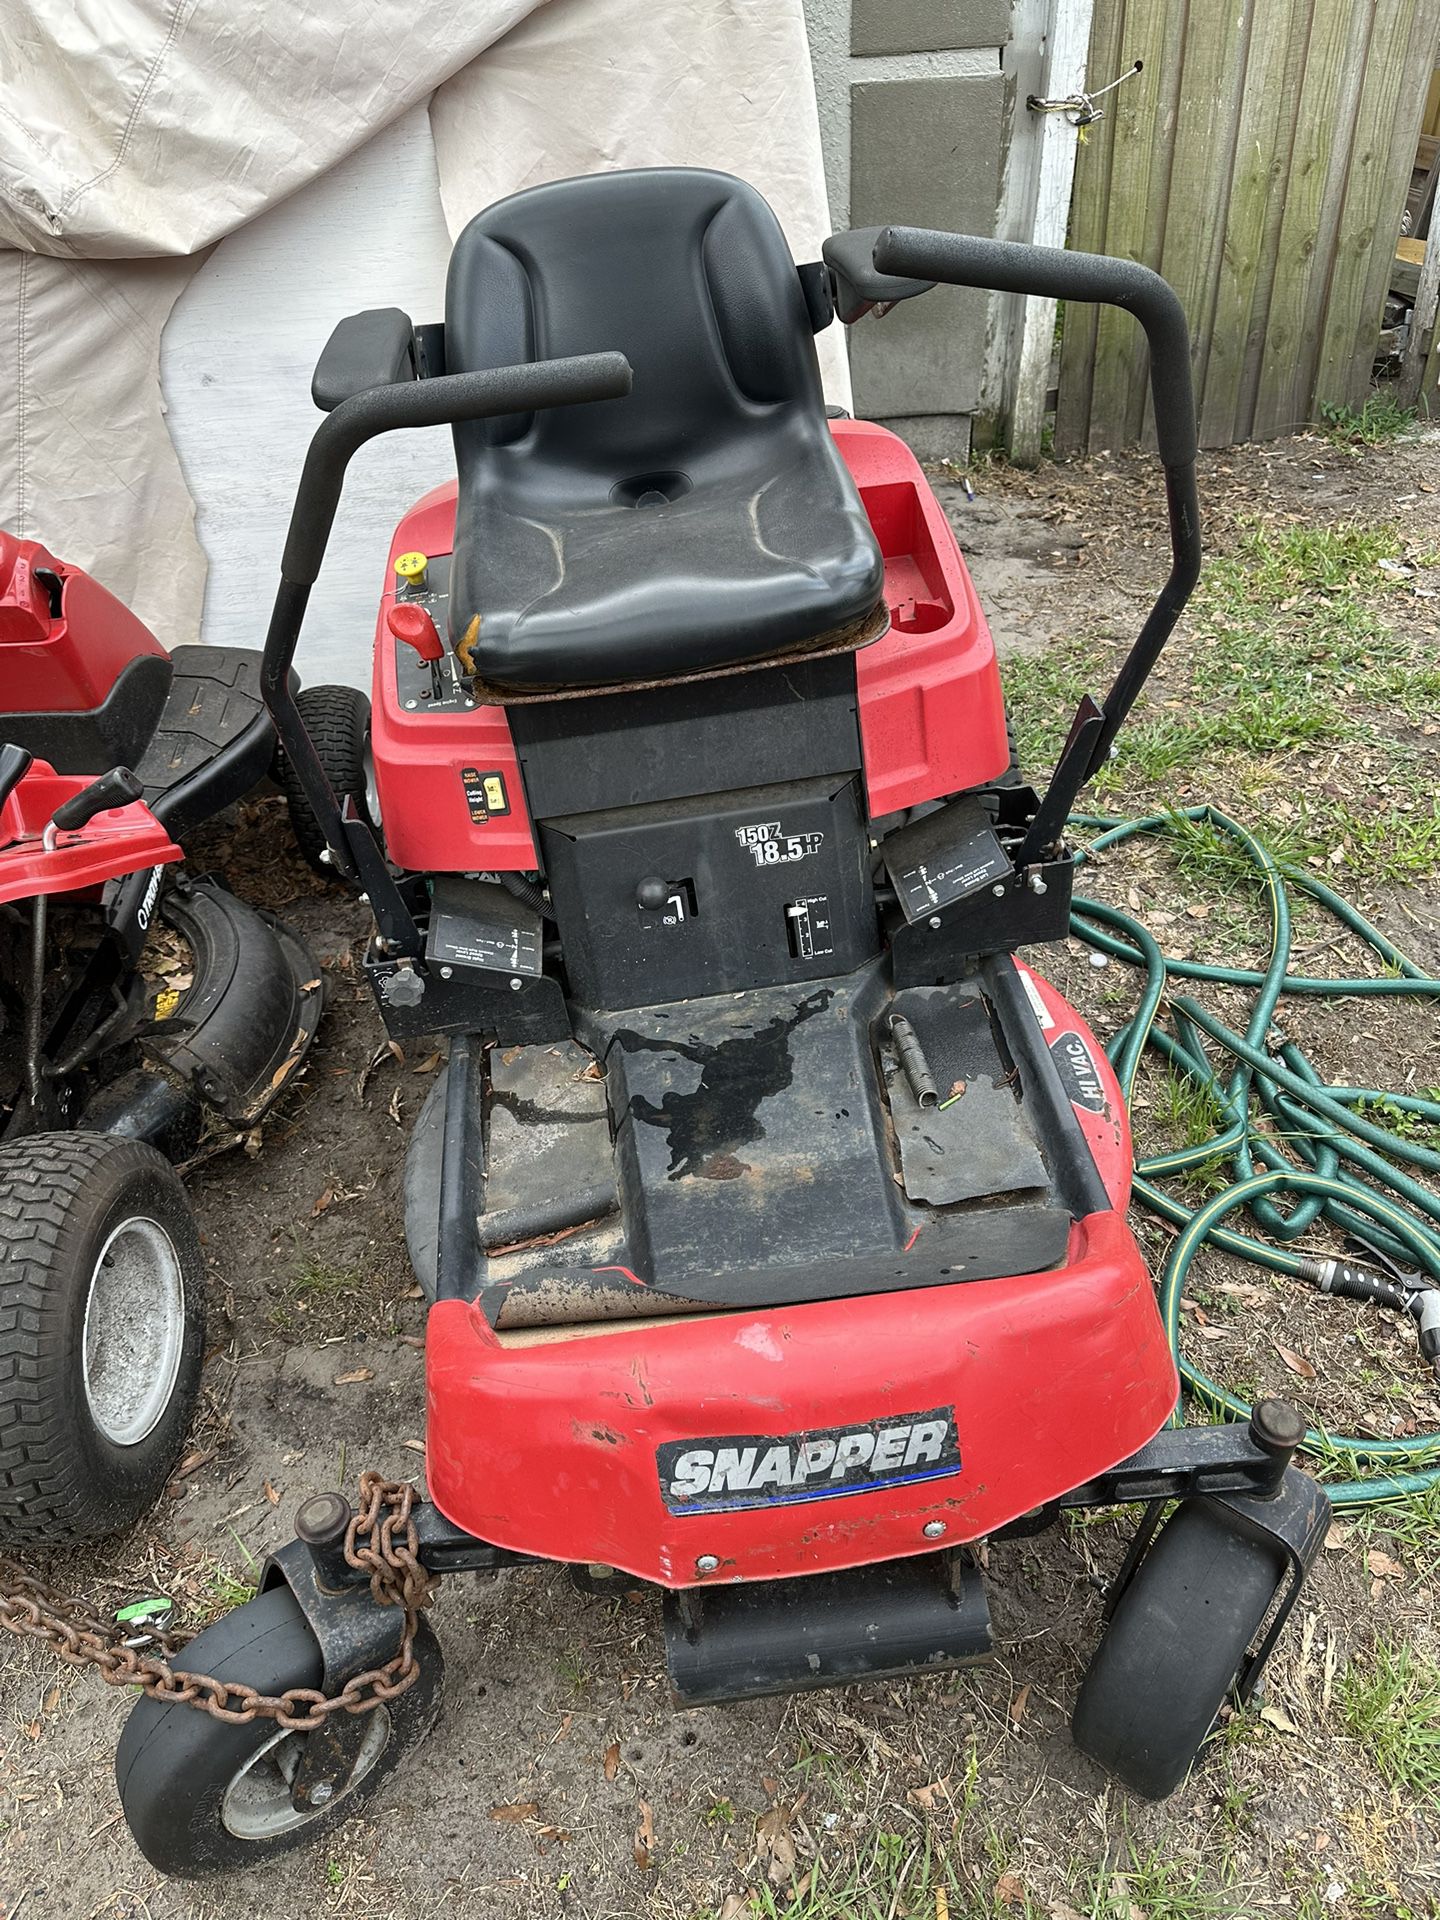 Lawn Mower And Lawn Equipment 